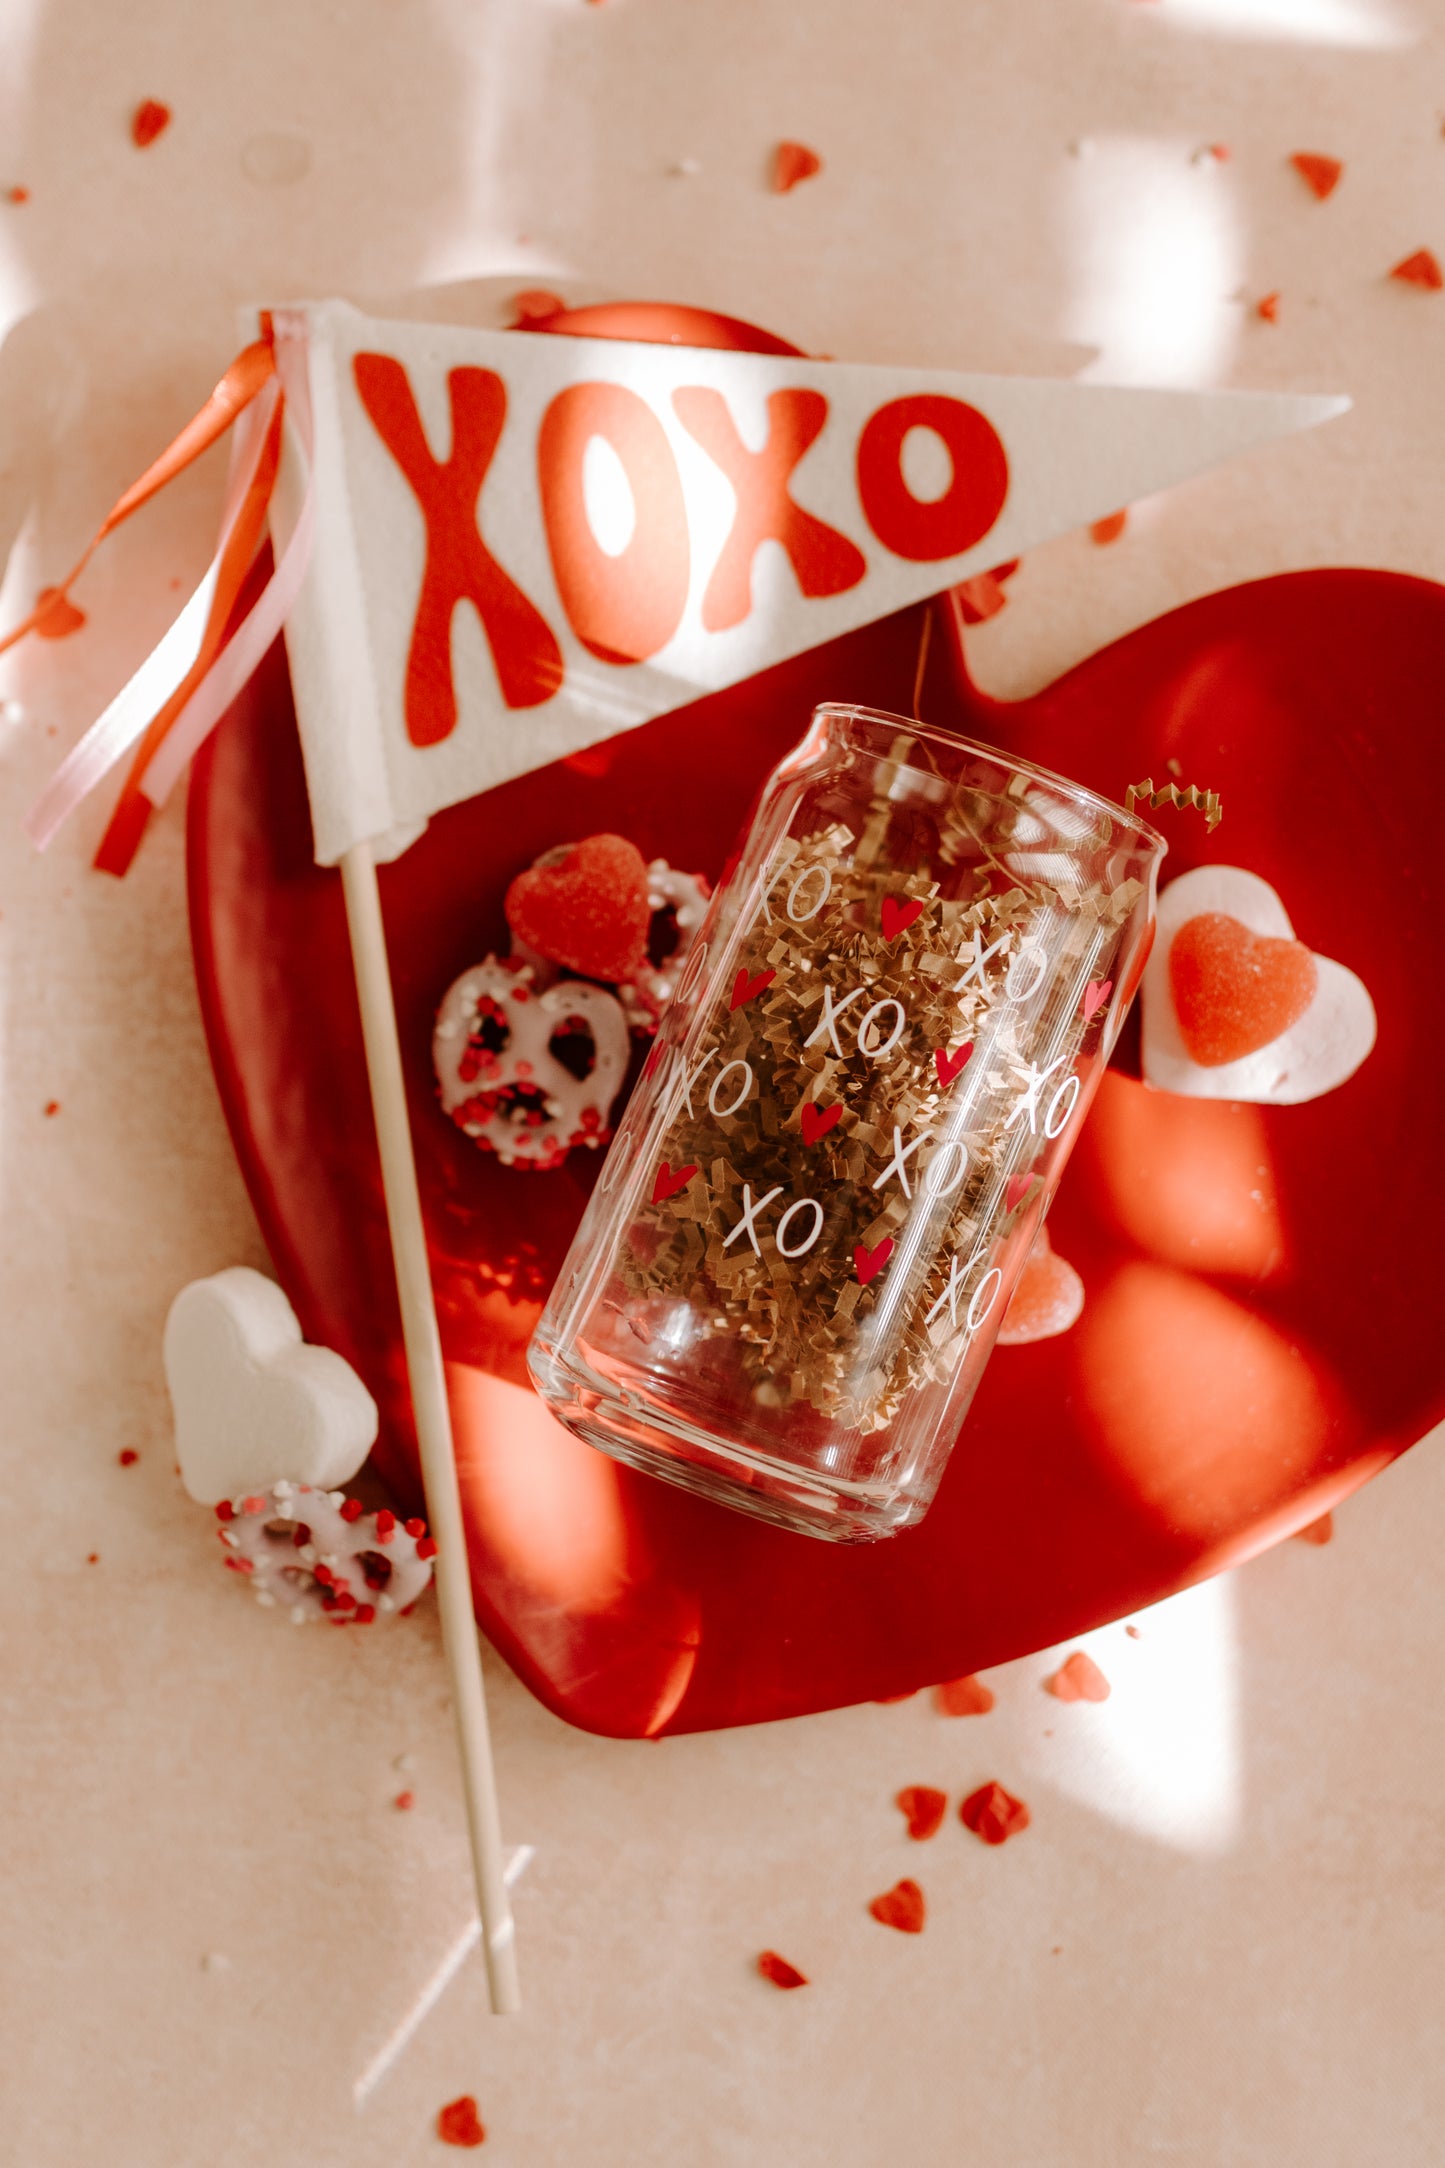 XOXO Can Glass